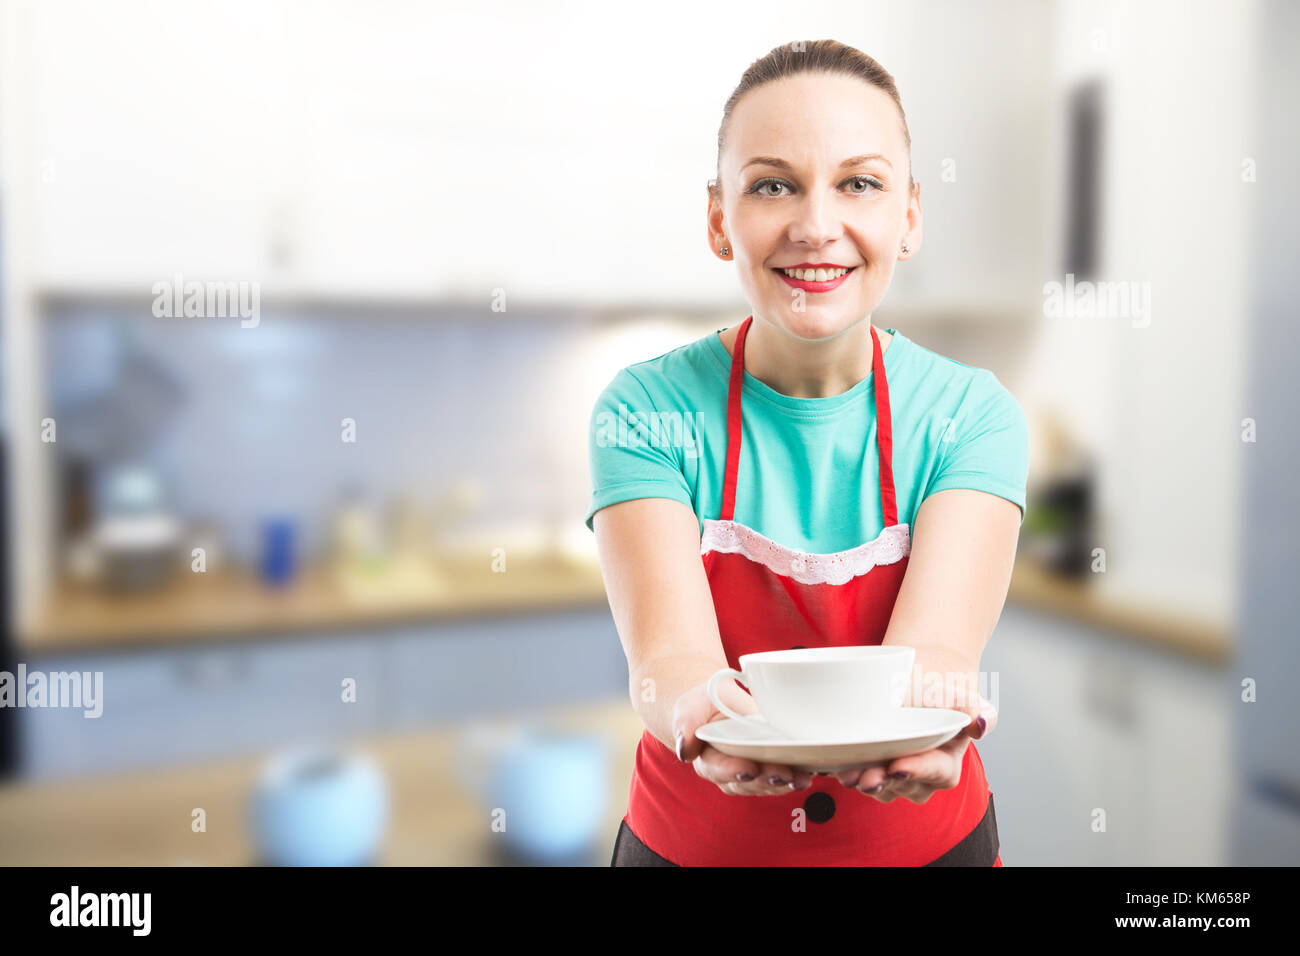 Housemaid or wife offering a cup of coffee or tea on kitchen background wearing red apron Stock Photo